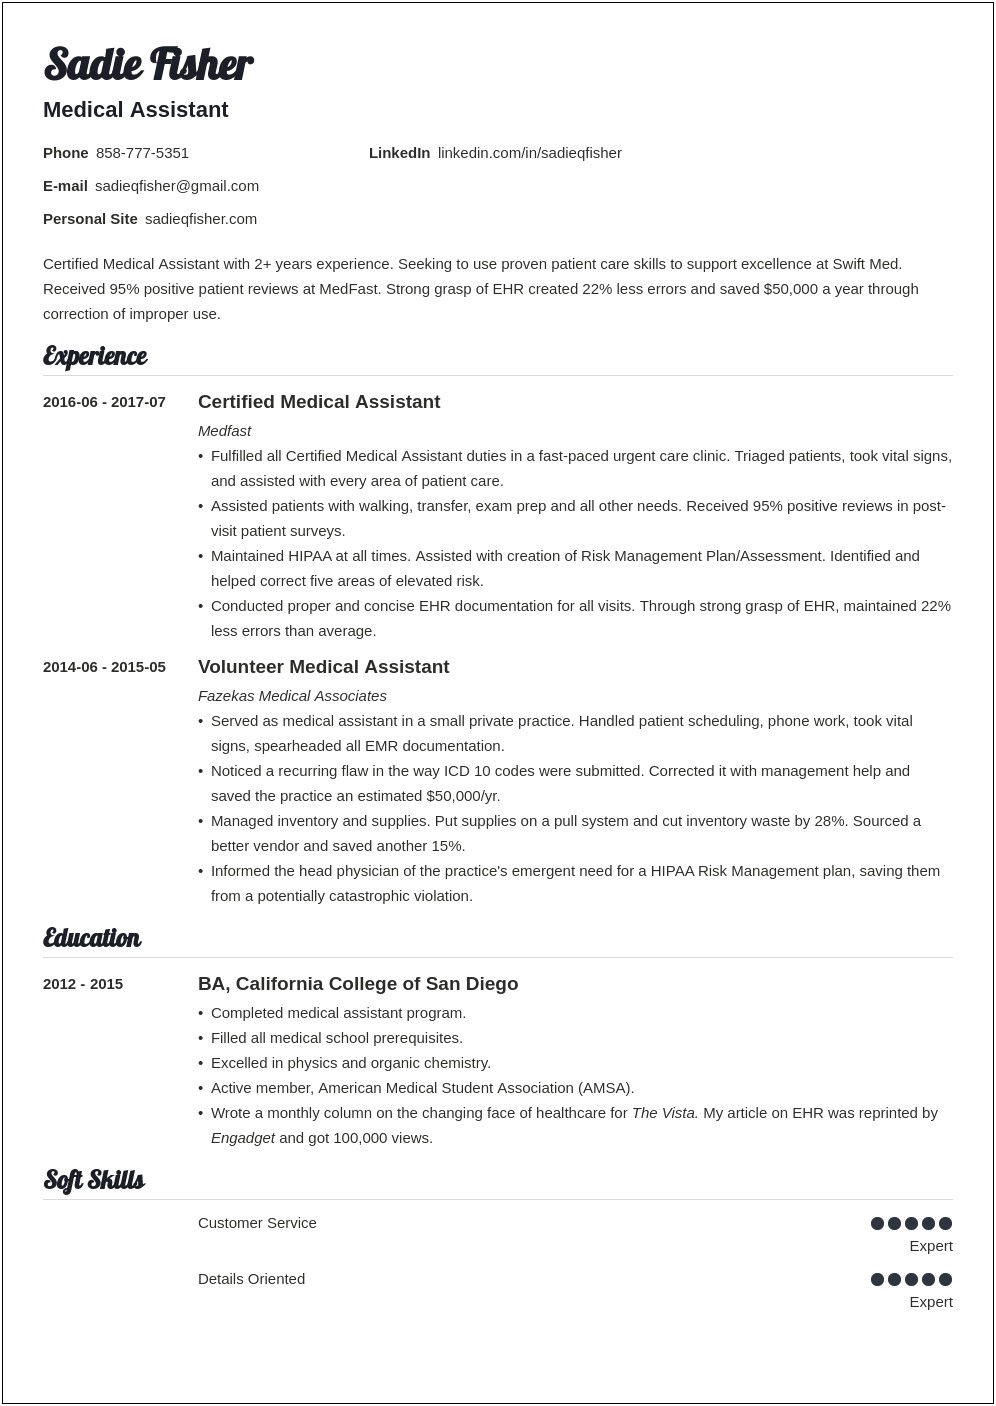 Medical Assistant Professional Summary For Resume